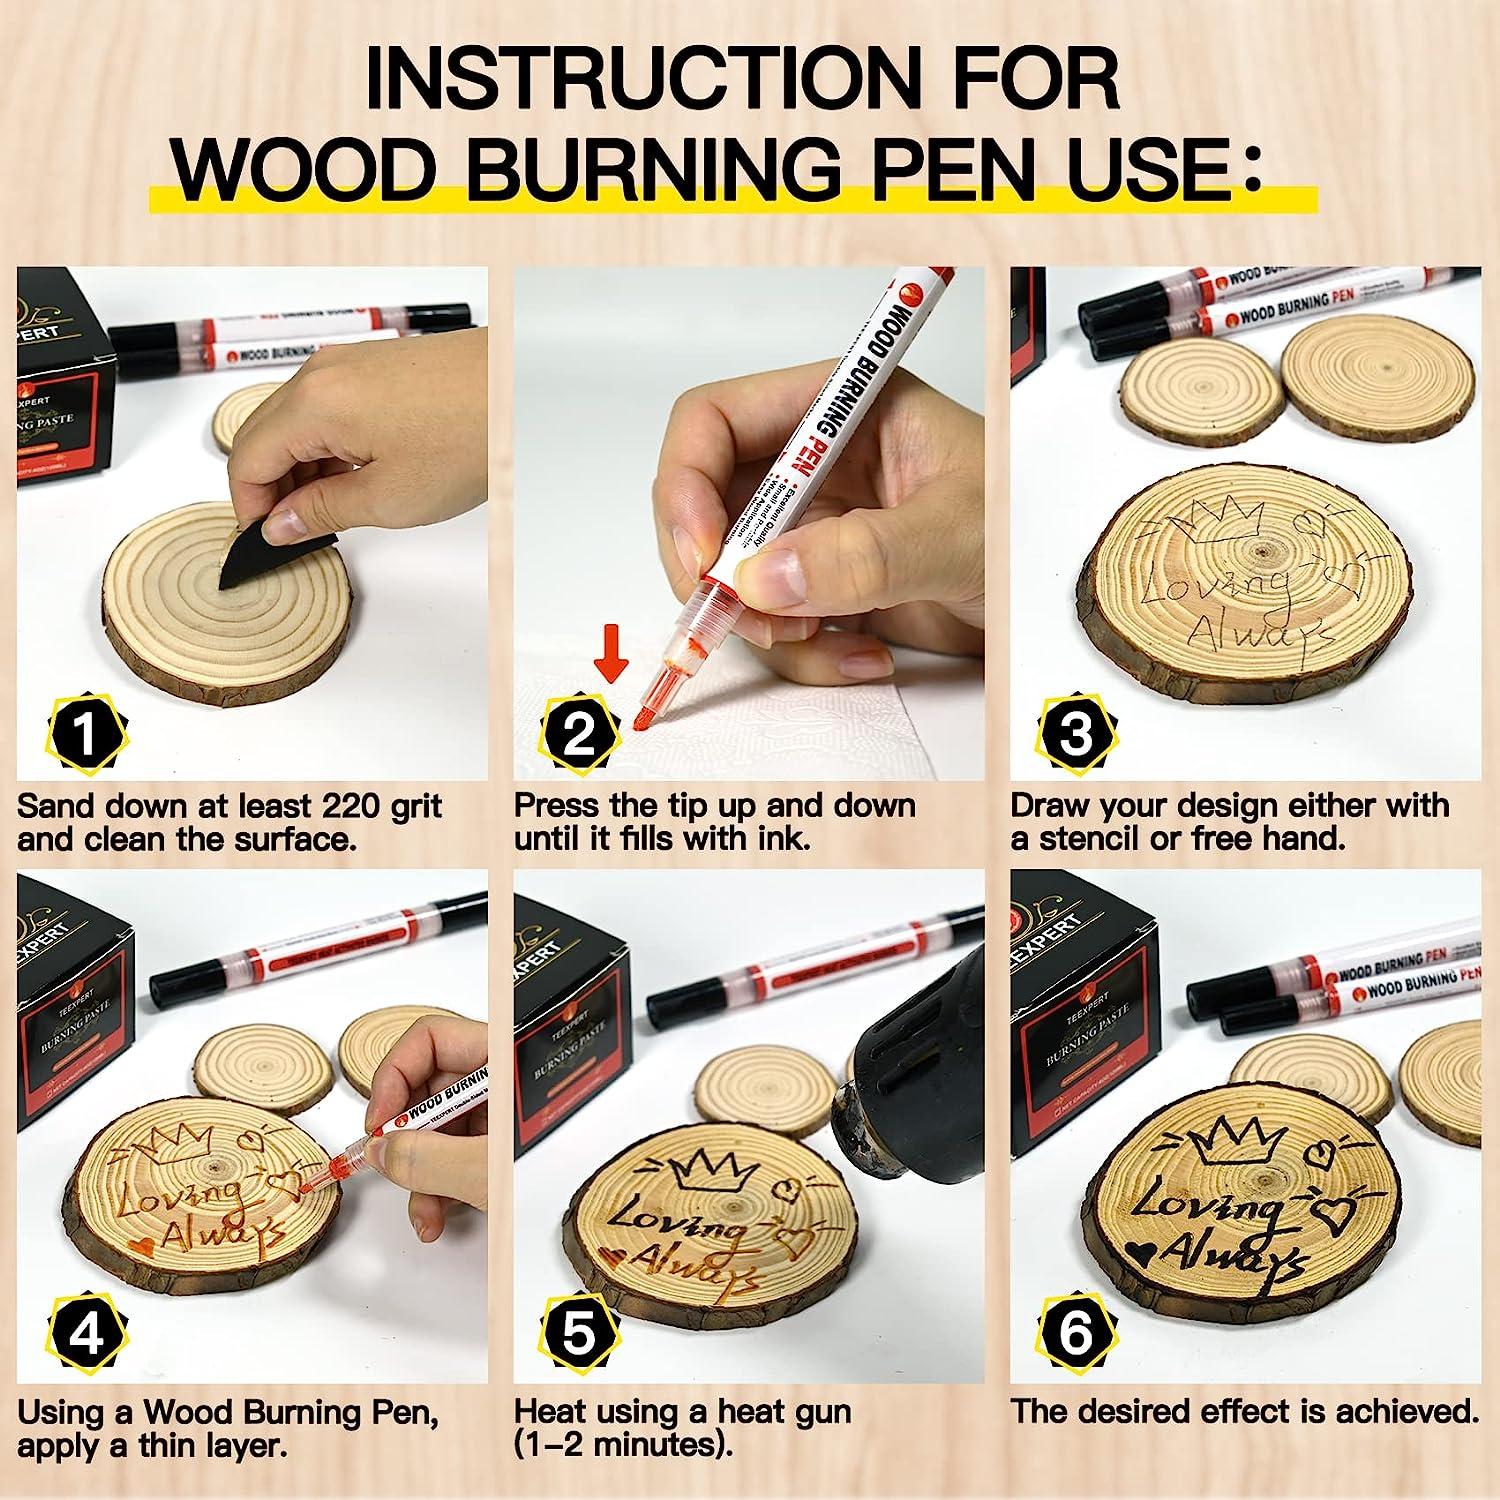 Scorch Paste - Wood Burning Paste, Wood Burning Gel for Crafting & Stencil, Stable Heat Activated Paste, Accurately & Easily Burn Designs on Wood, Can